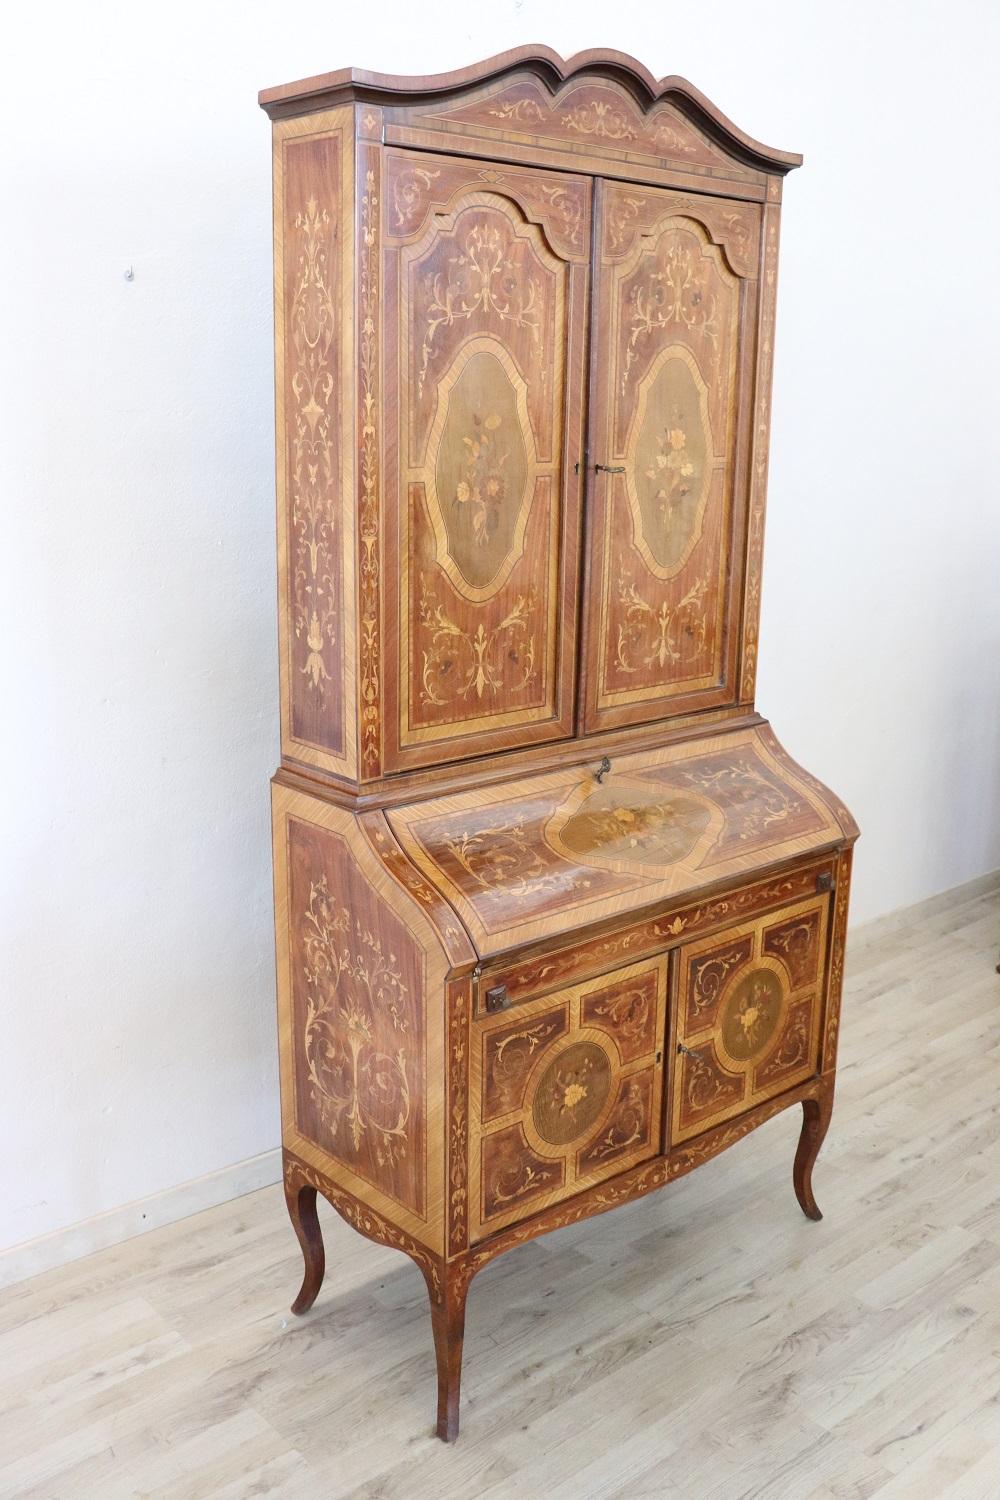 Elegant cabinet in precious inlaid walnut 1930s. This cabinet is characterized by a refined inlay work with neoclassical decorations. The inlay is made using many different precious woods such as maple, rosewood etc. We advise you to look in detail